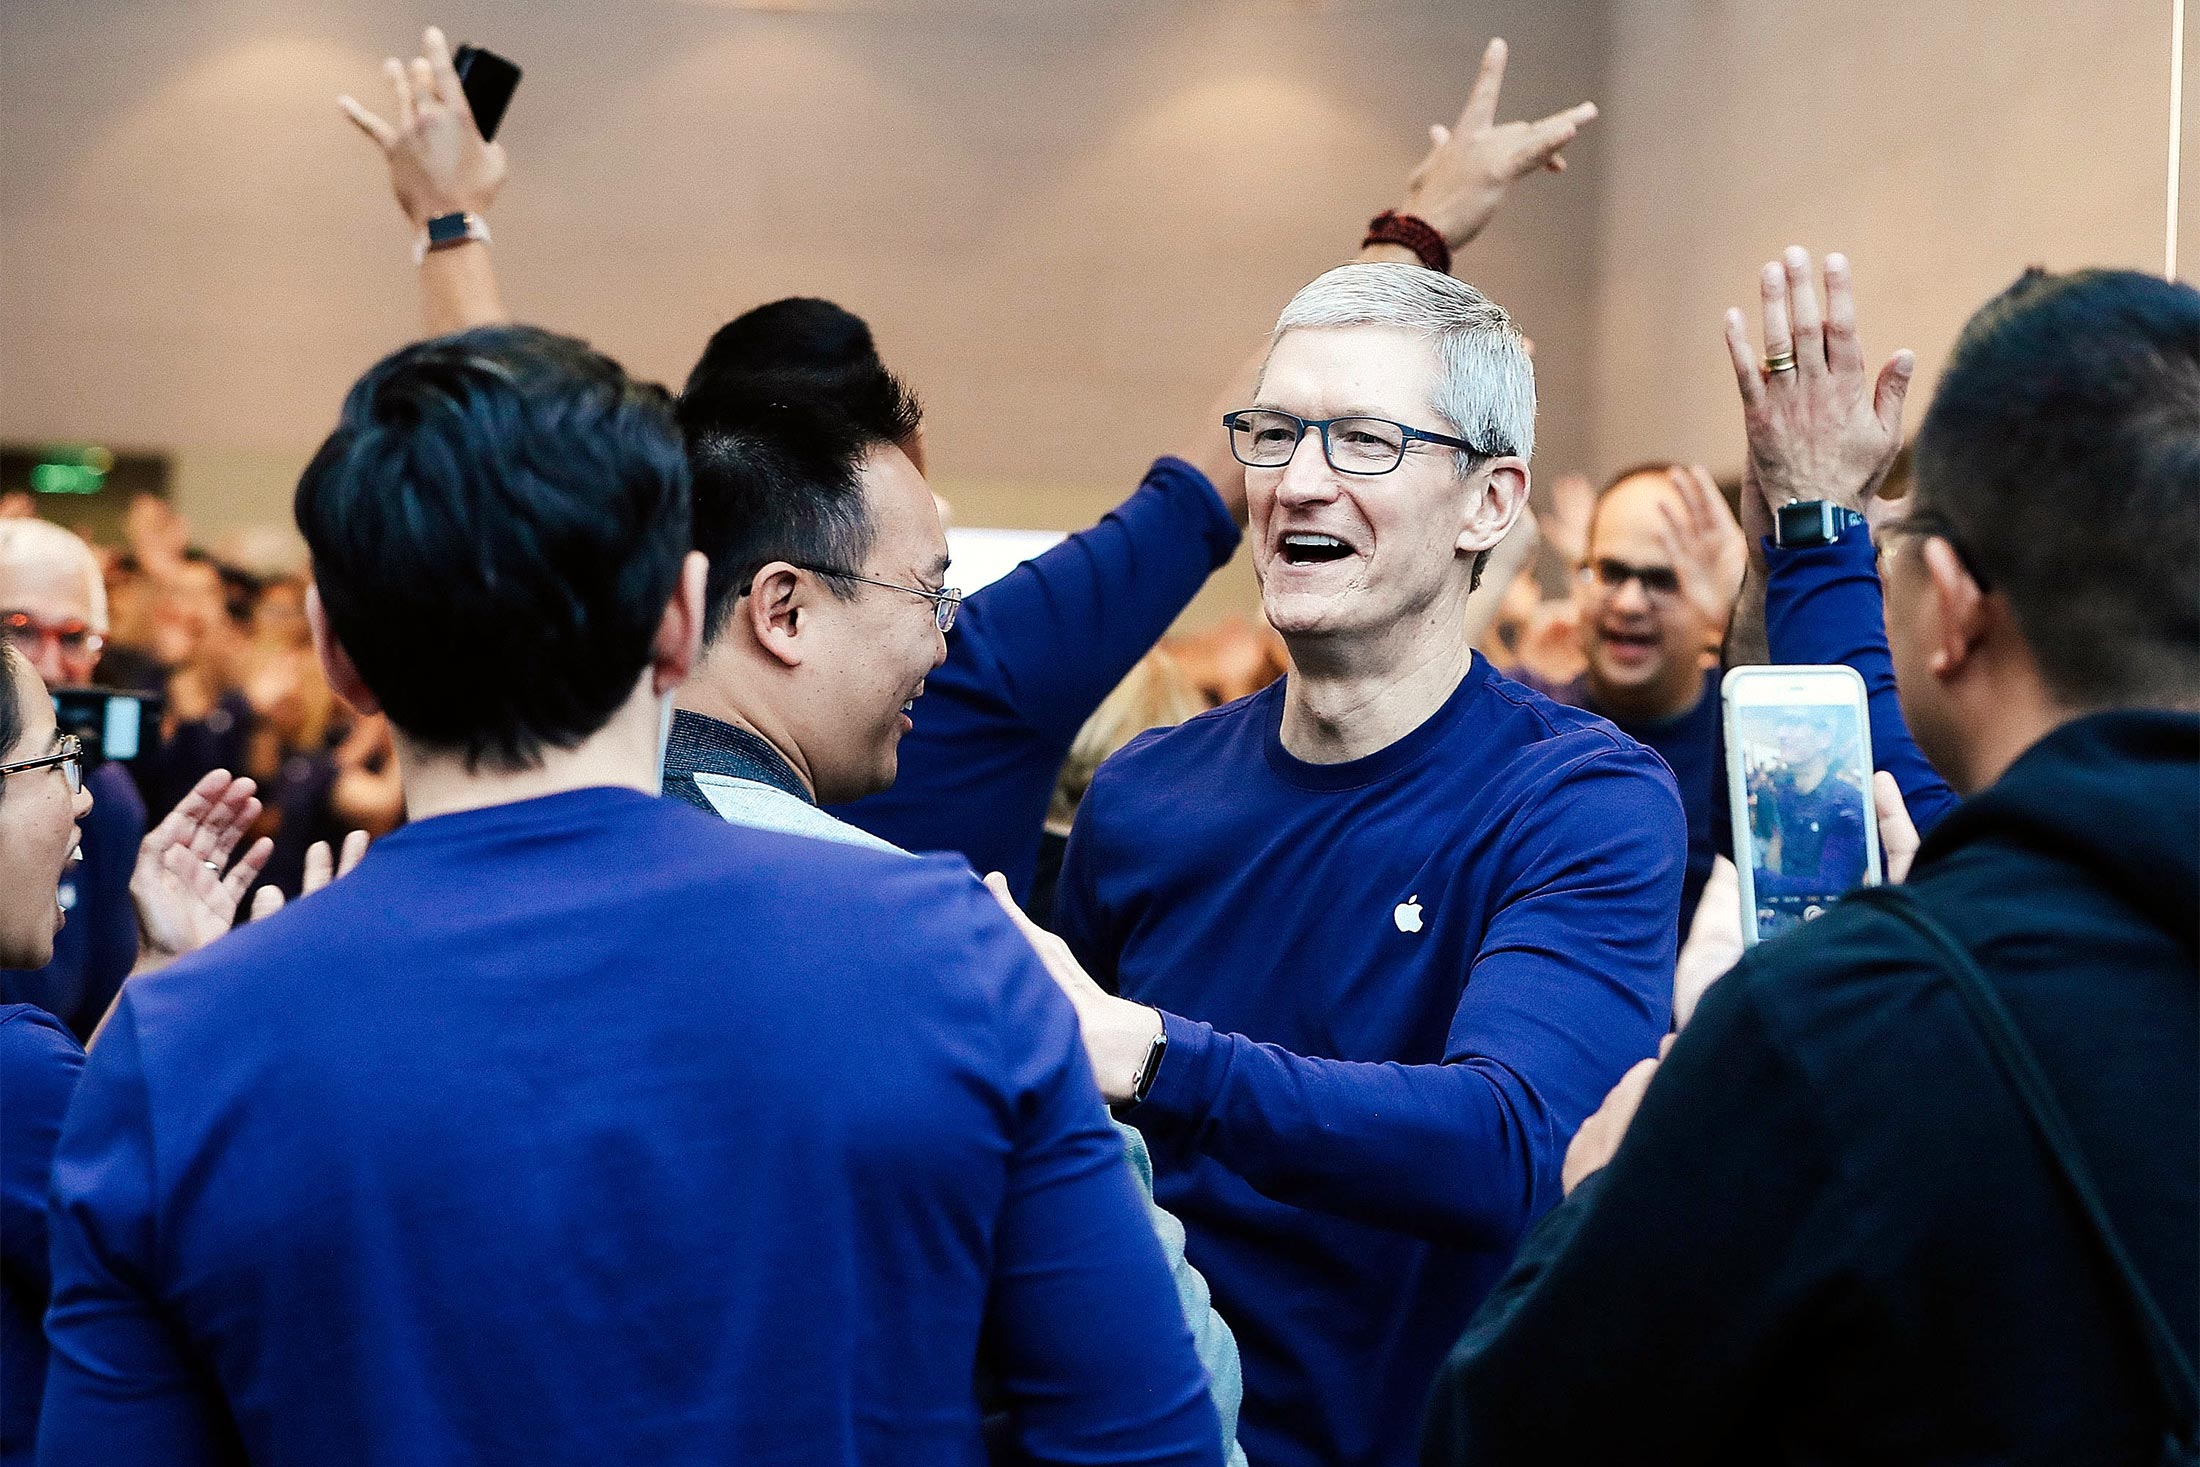 Tim Cook wears a long-sleeved Apple T-shirt as he greets customers for the iPhone X release at an Apple Store.